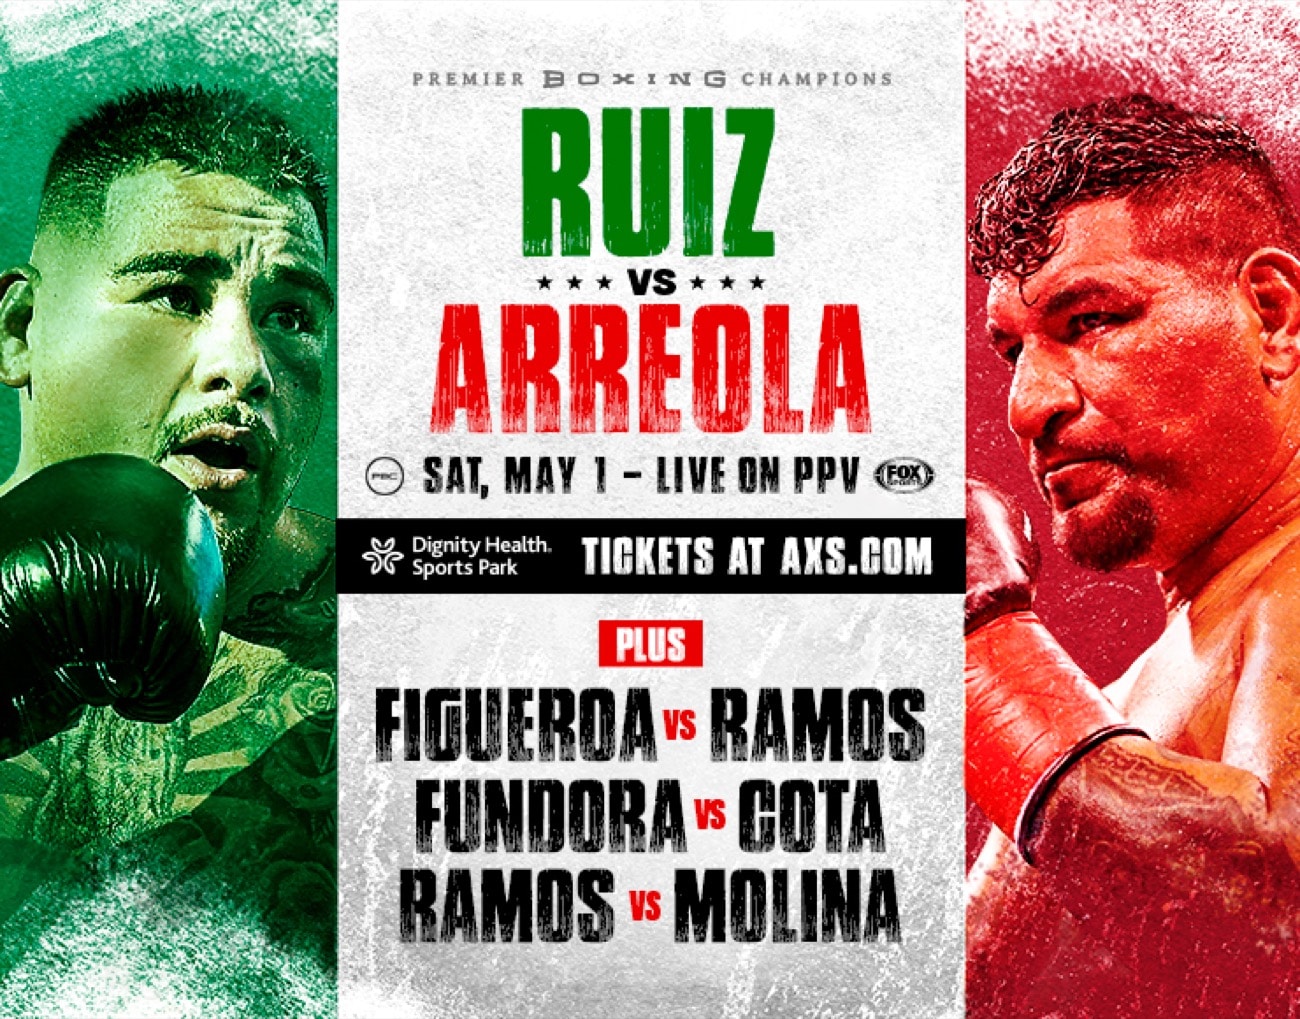 Image: Will Andy Ruiz Jr face Deontay Wilder after Arreola?